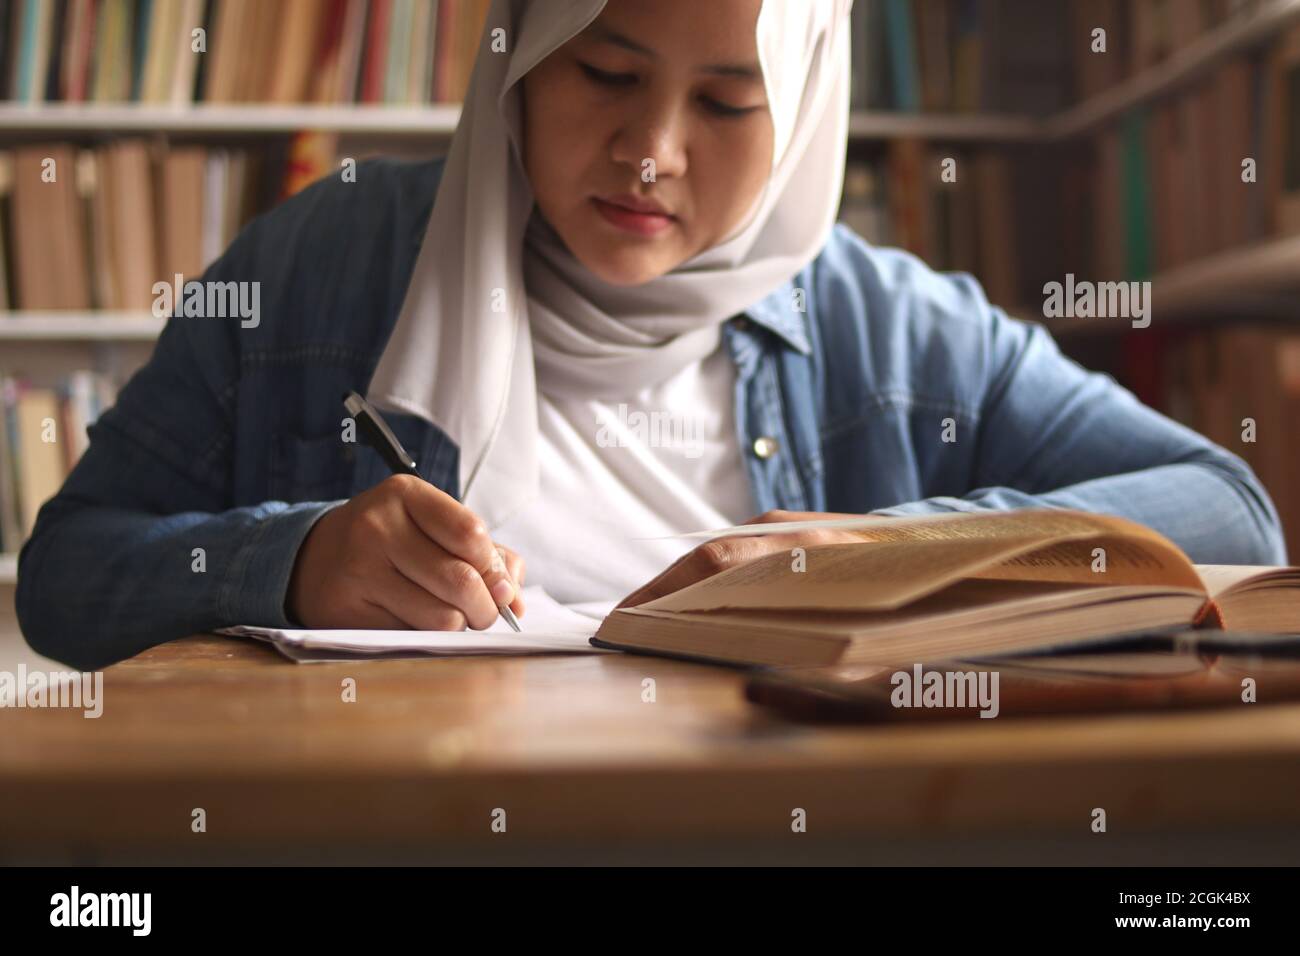 Asian muslim woman studying learning in library, exam preparation concept. Female college student doing research and making notes in her book Stock Photo